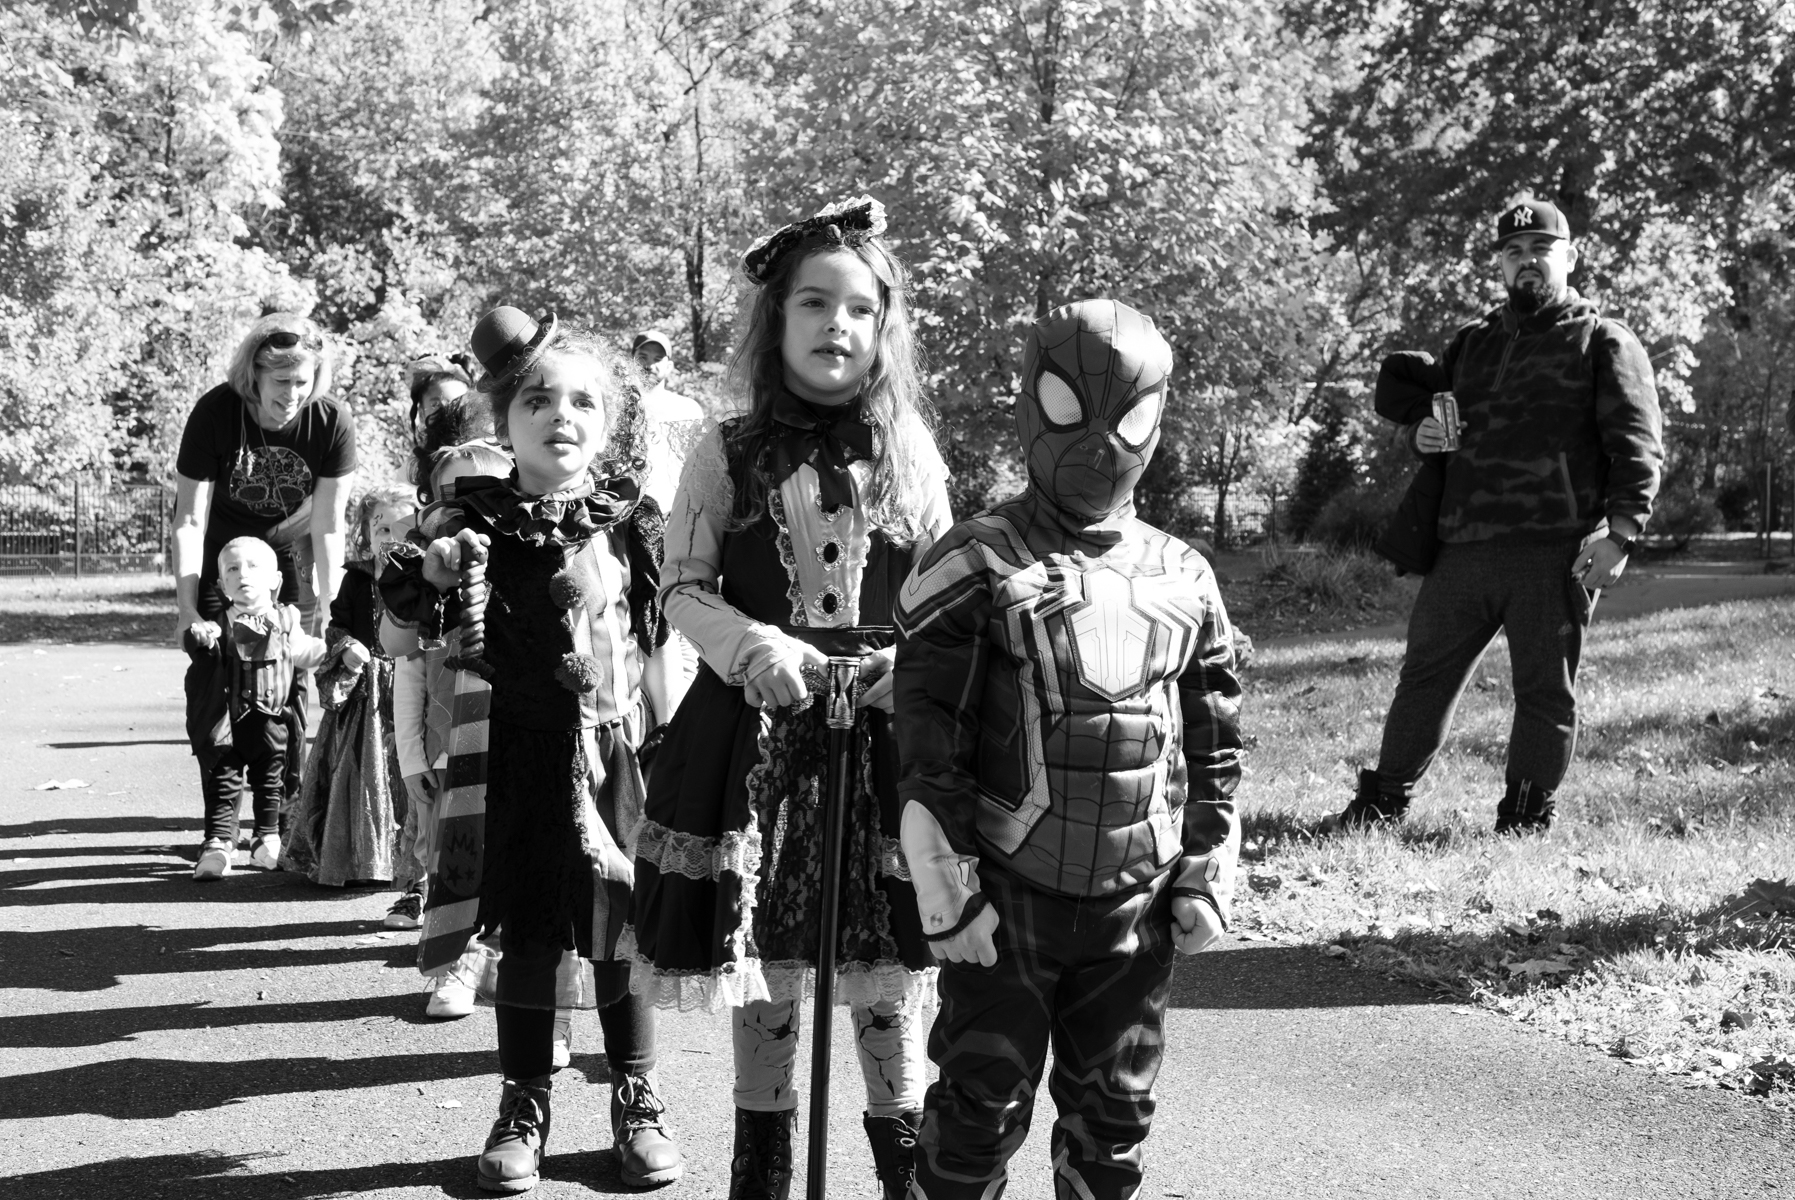 Children wearing costumes stand in a line at the Come as You Art event on the Karl Stirner Arts Trail.